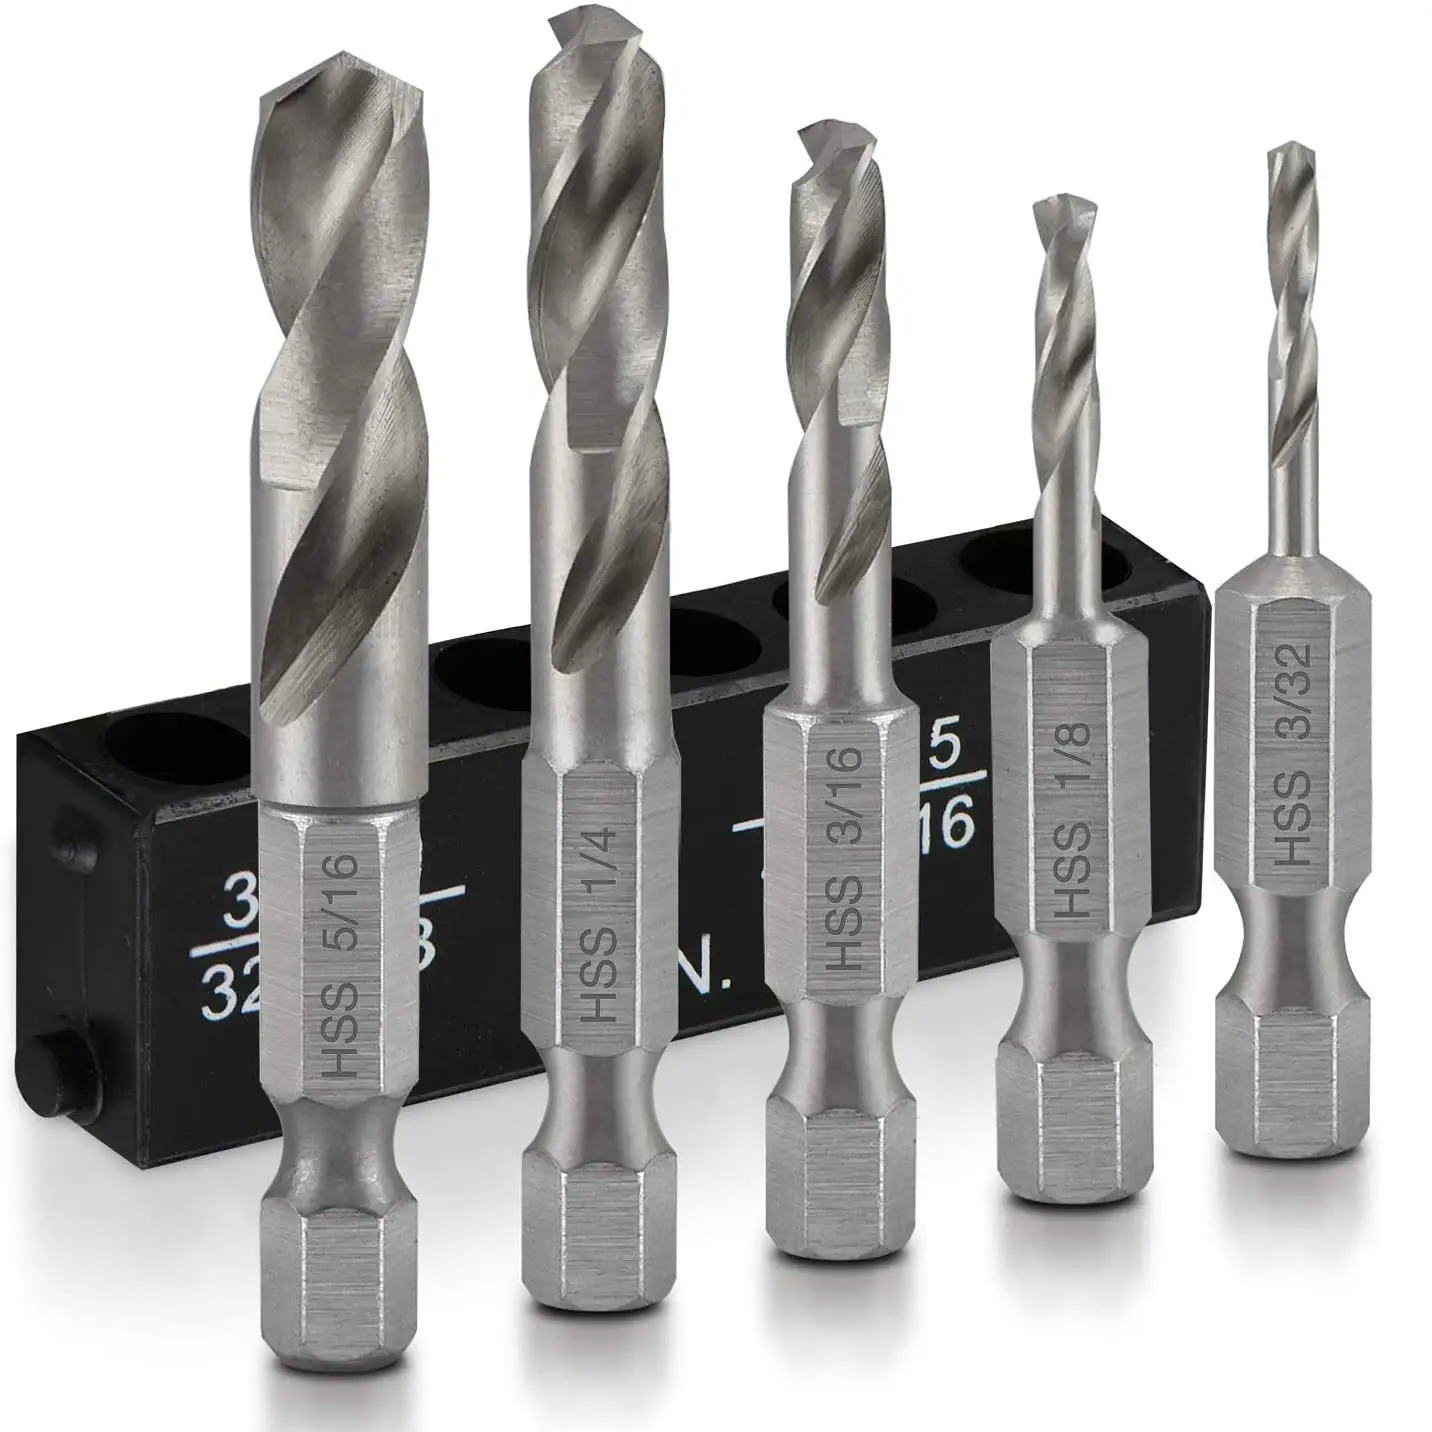 3 types of drill bits